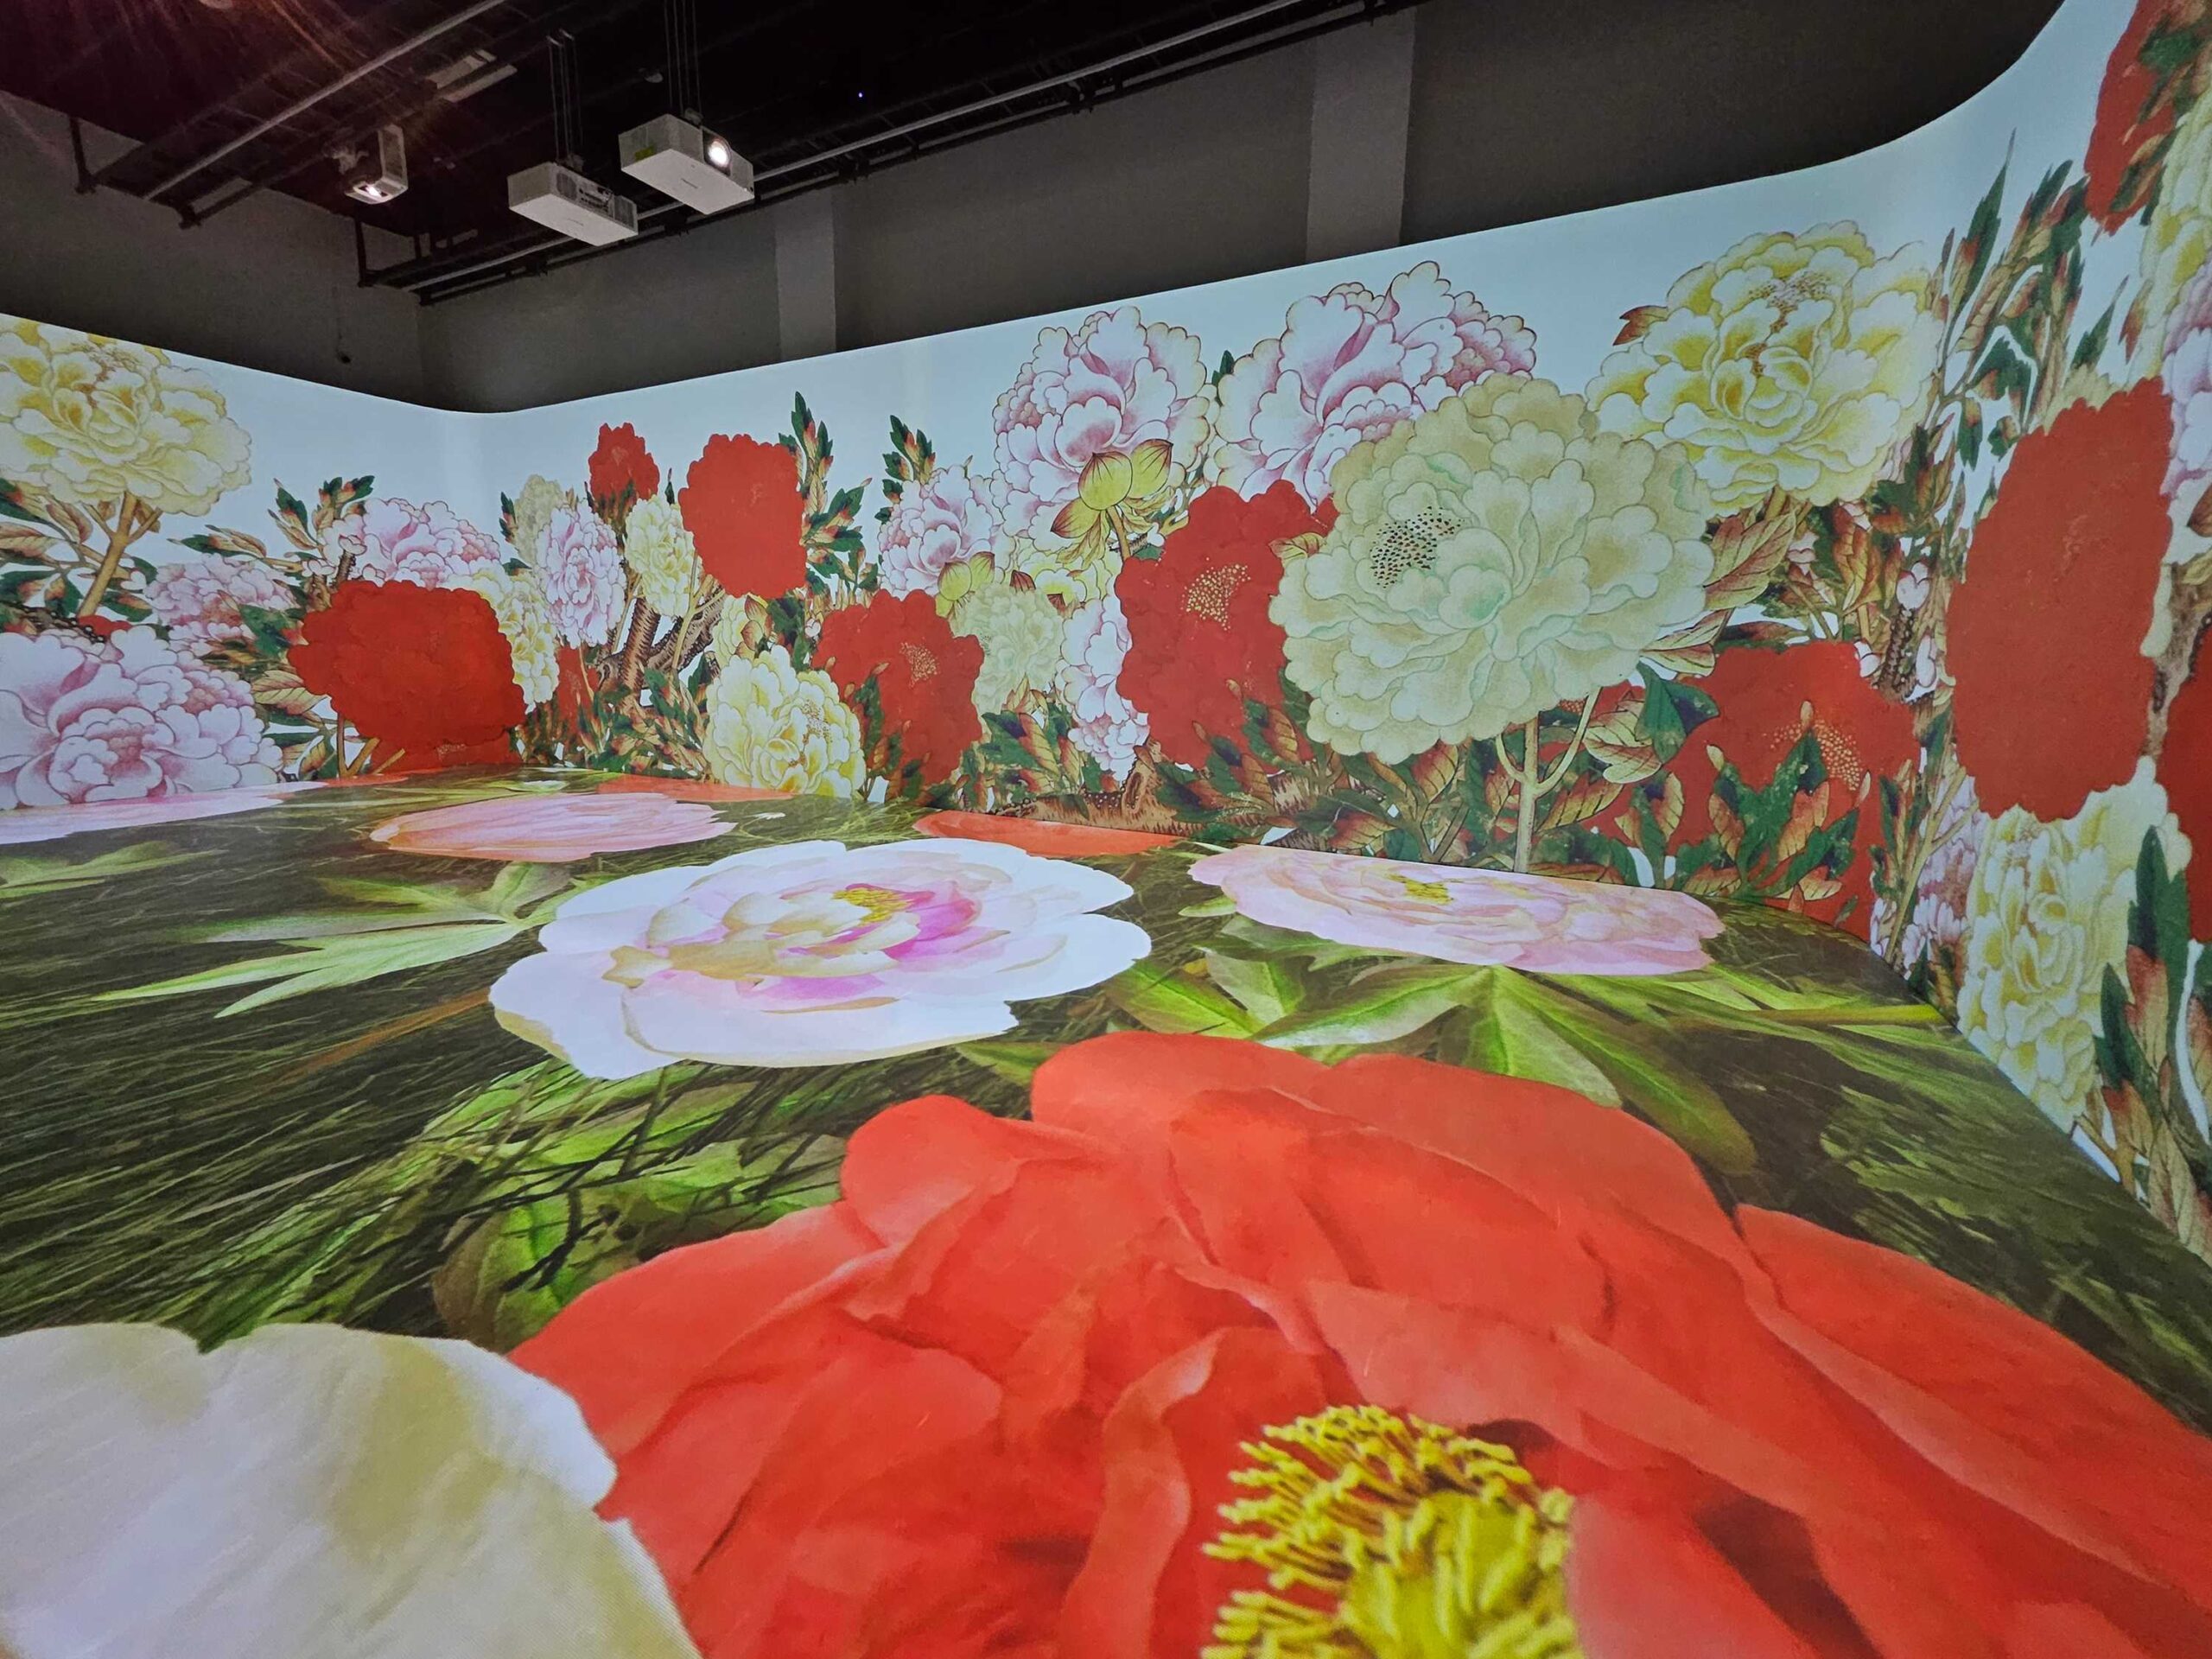 Witness “Peonies in Bloom” at the “Endless Landscape: A Digitally Reimagined Korean Art Exhibit.” 